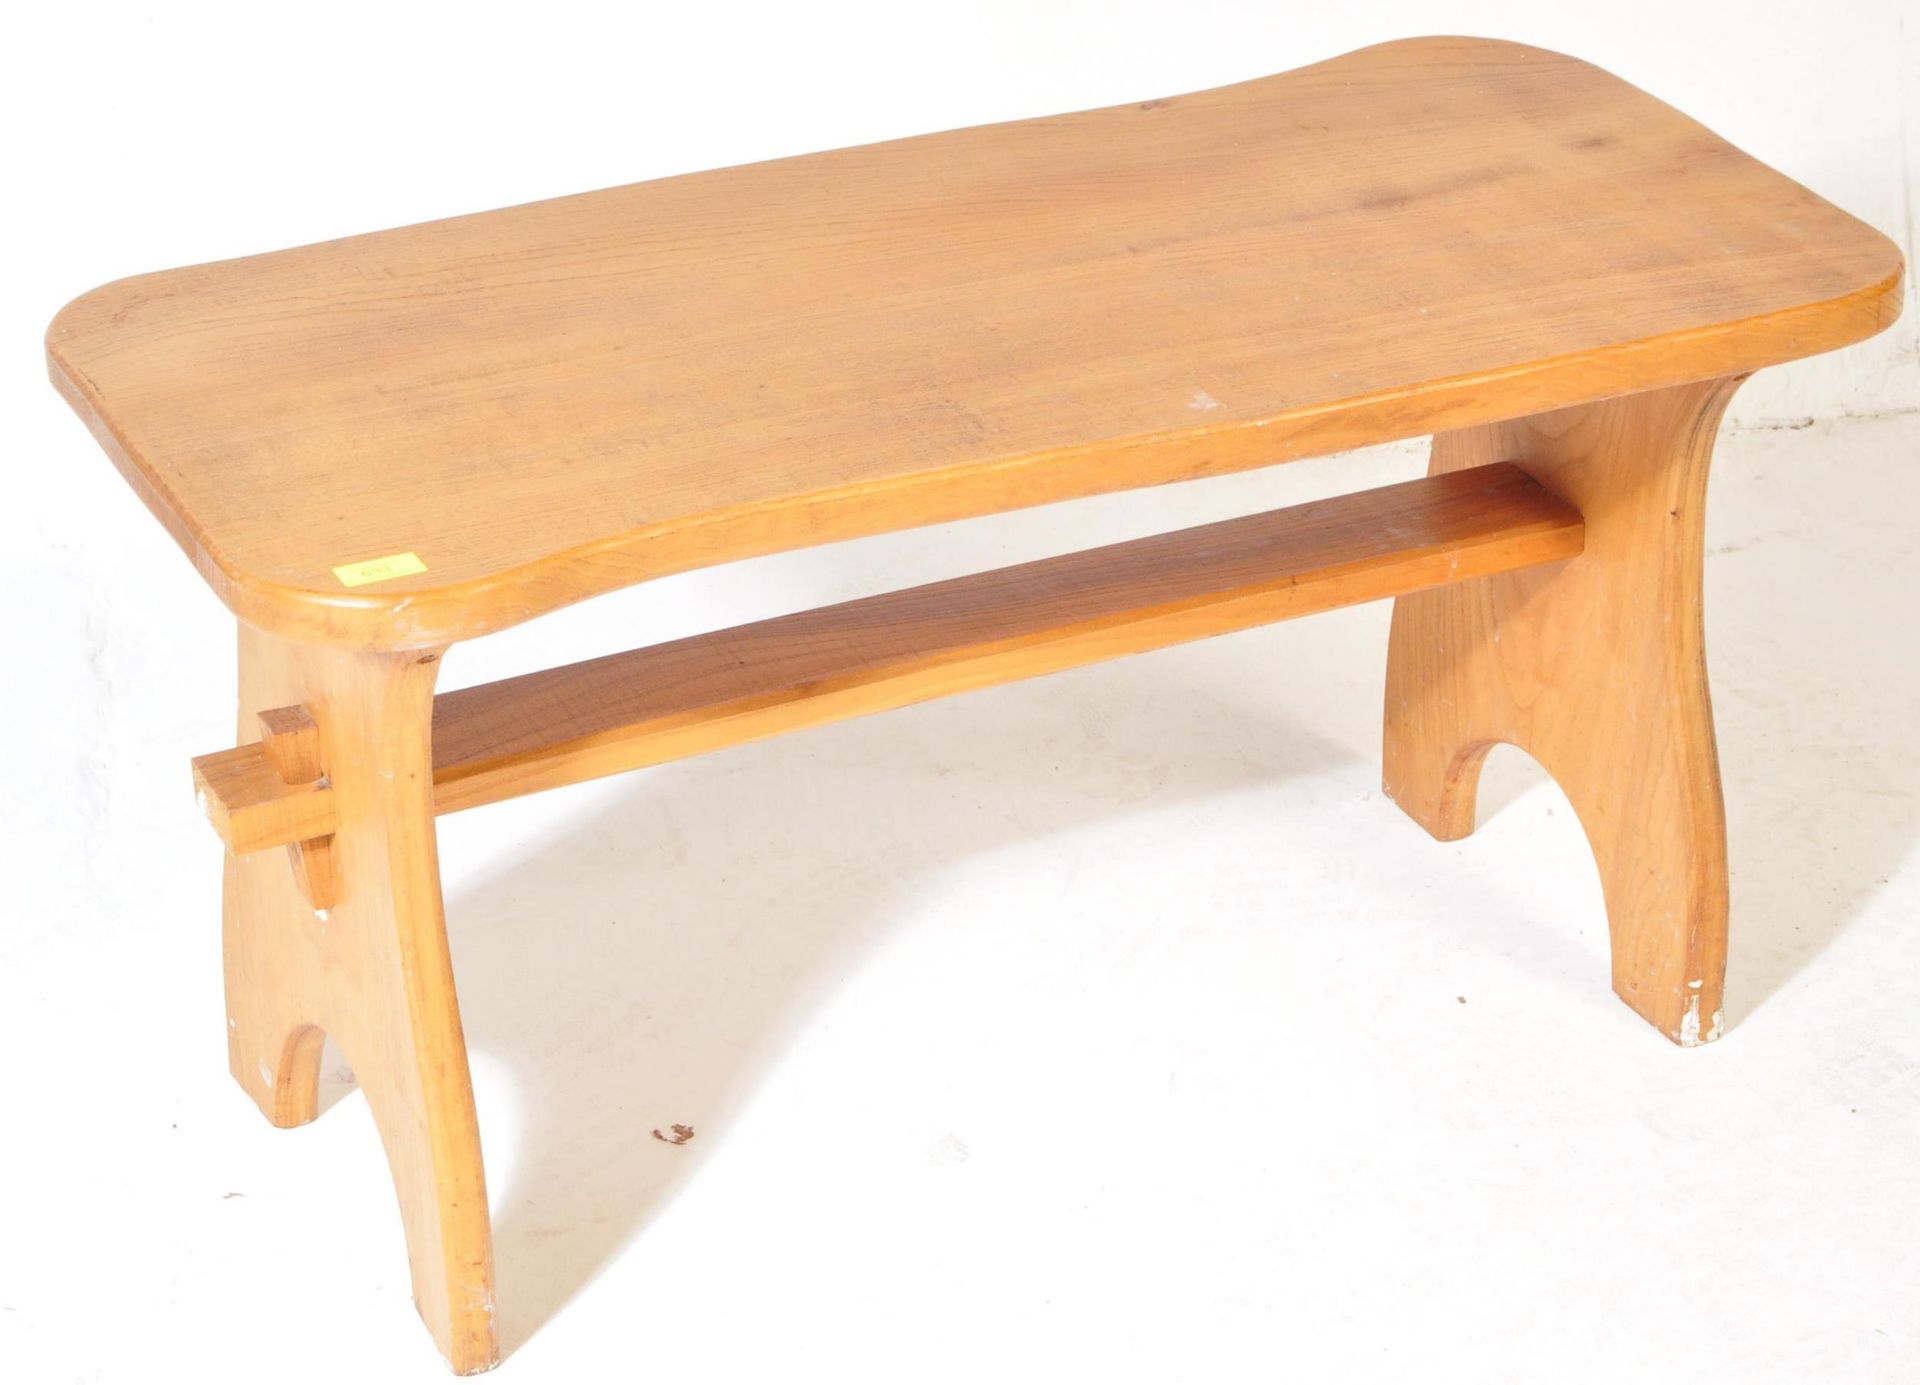 VINTAGE PINE COUNTRY STYLE OCCASIONAL COFFEE TABLE - Image 2 of 4